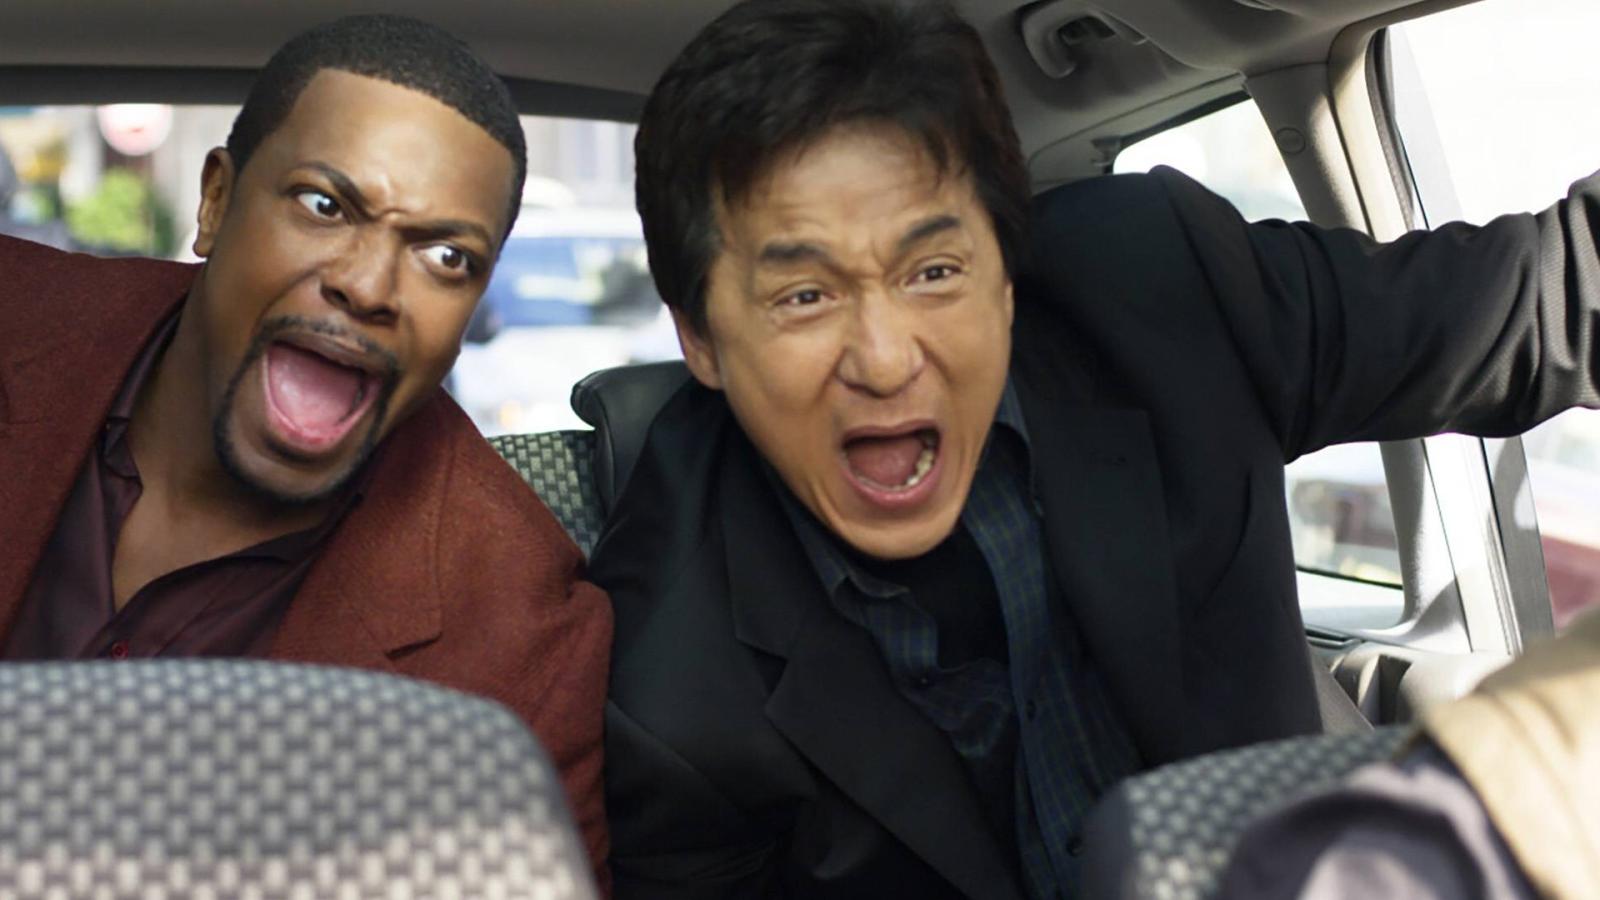 10 Buddy Cop Movies That Totally Nailed the Formula (and 5 That Didn't) - image 2